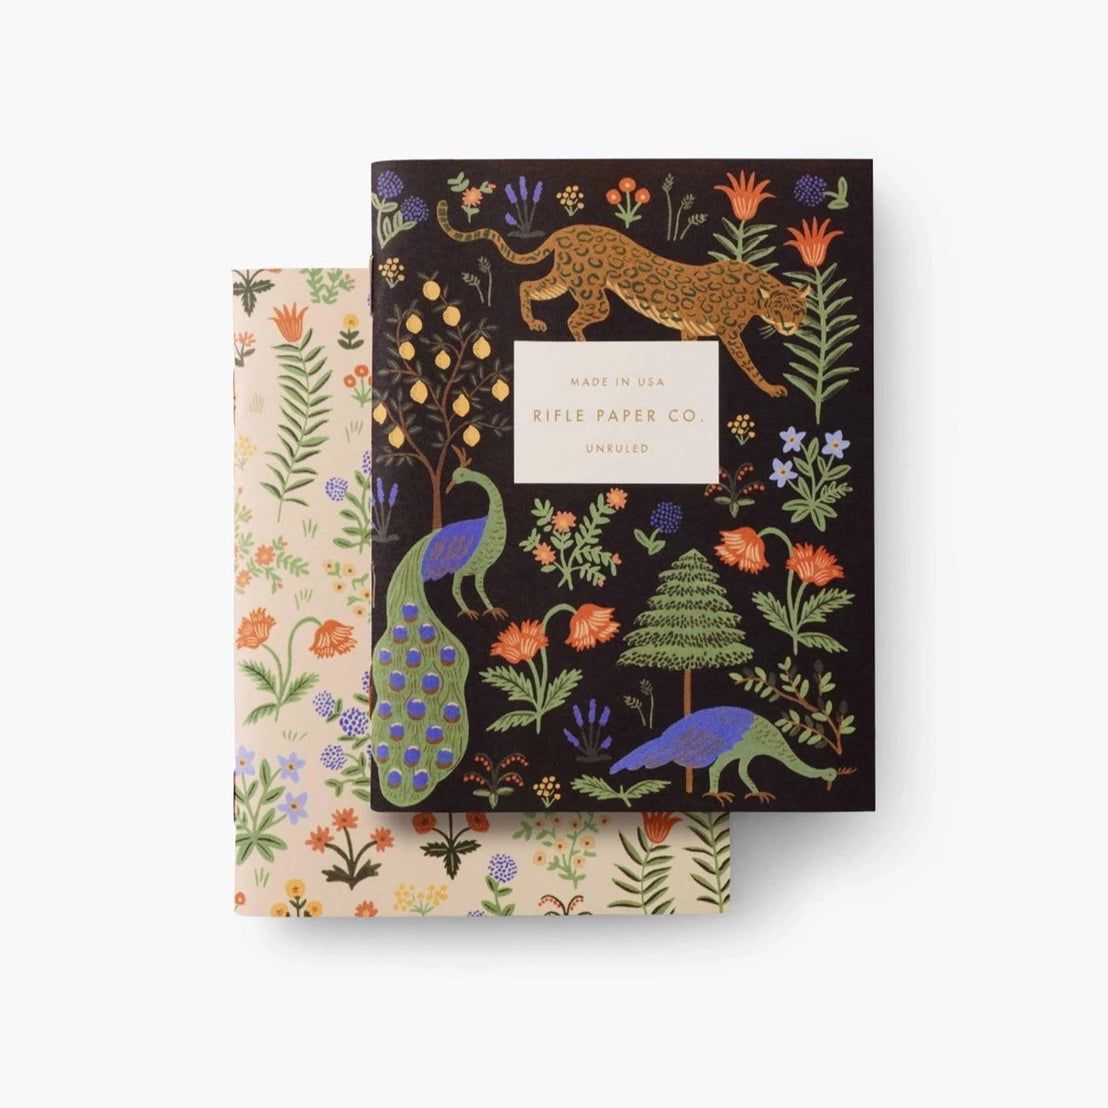 Menagerie Pocket Notebook Set, Rifle Paper Co.